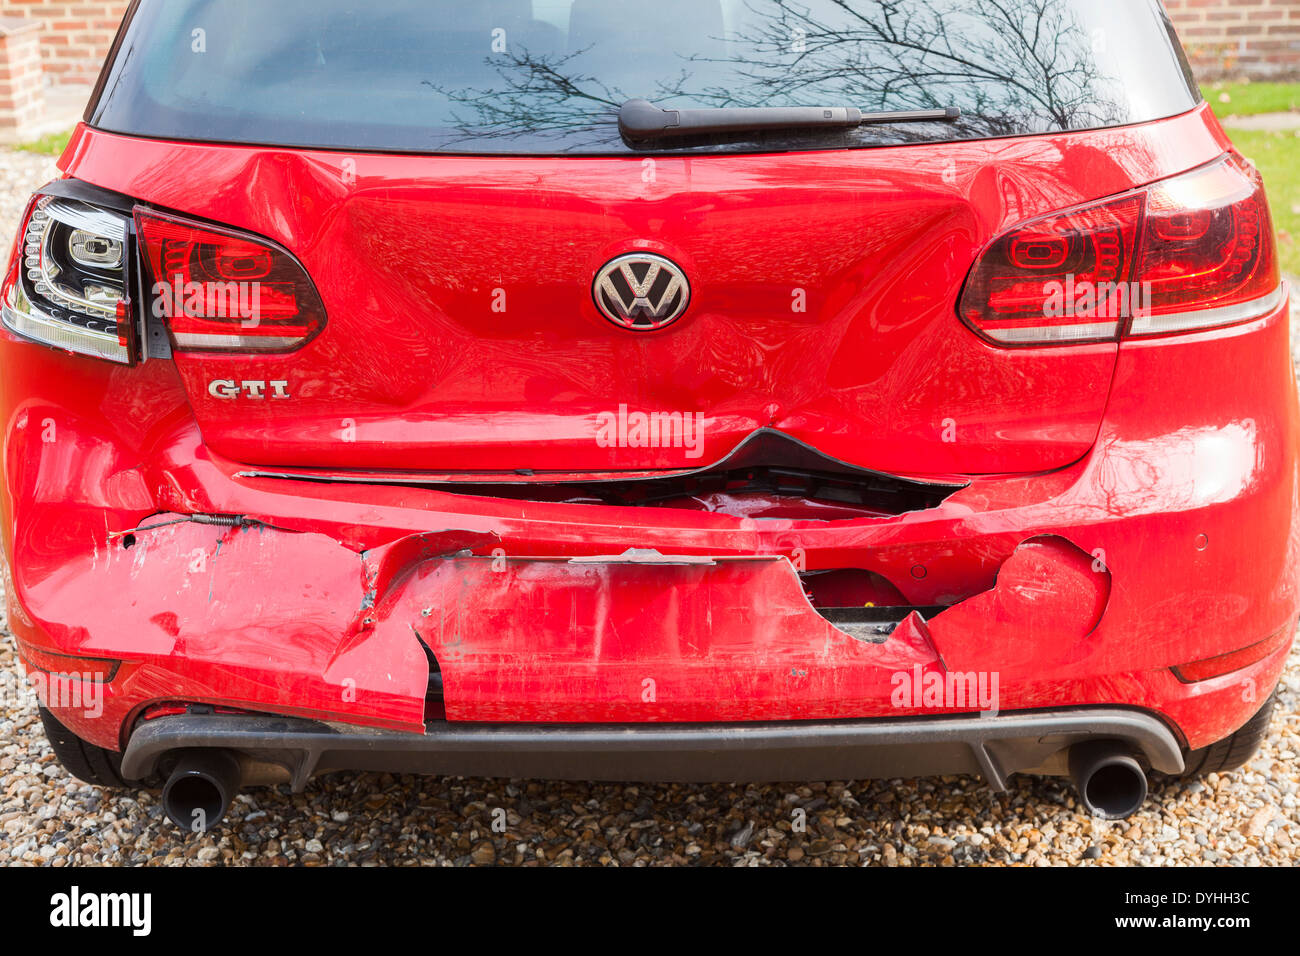 Red Volkswagen Golf GTI damaged in rear collision road accident Stock Photo